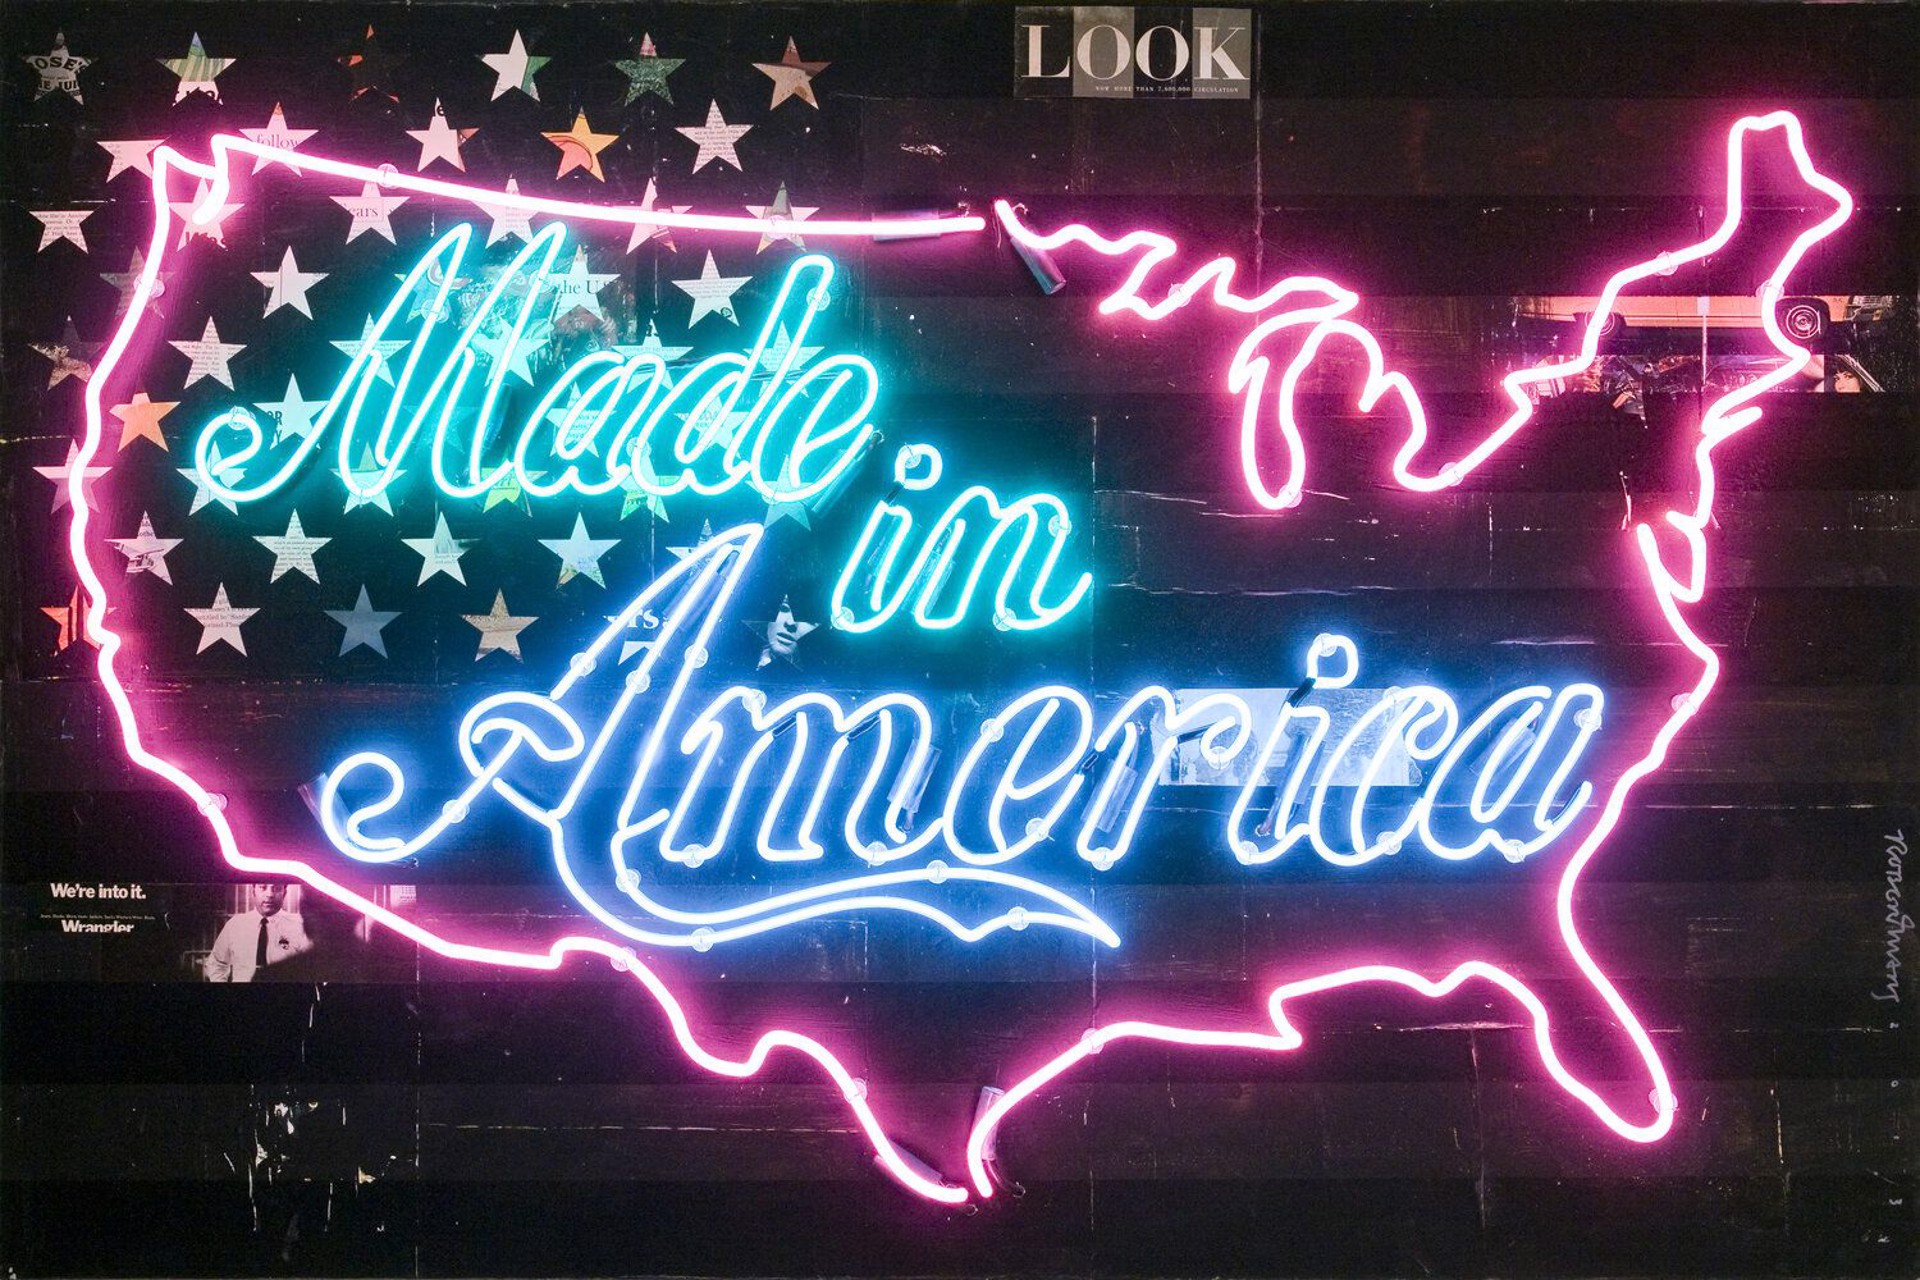 Made in America Commission by Robert Mars